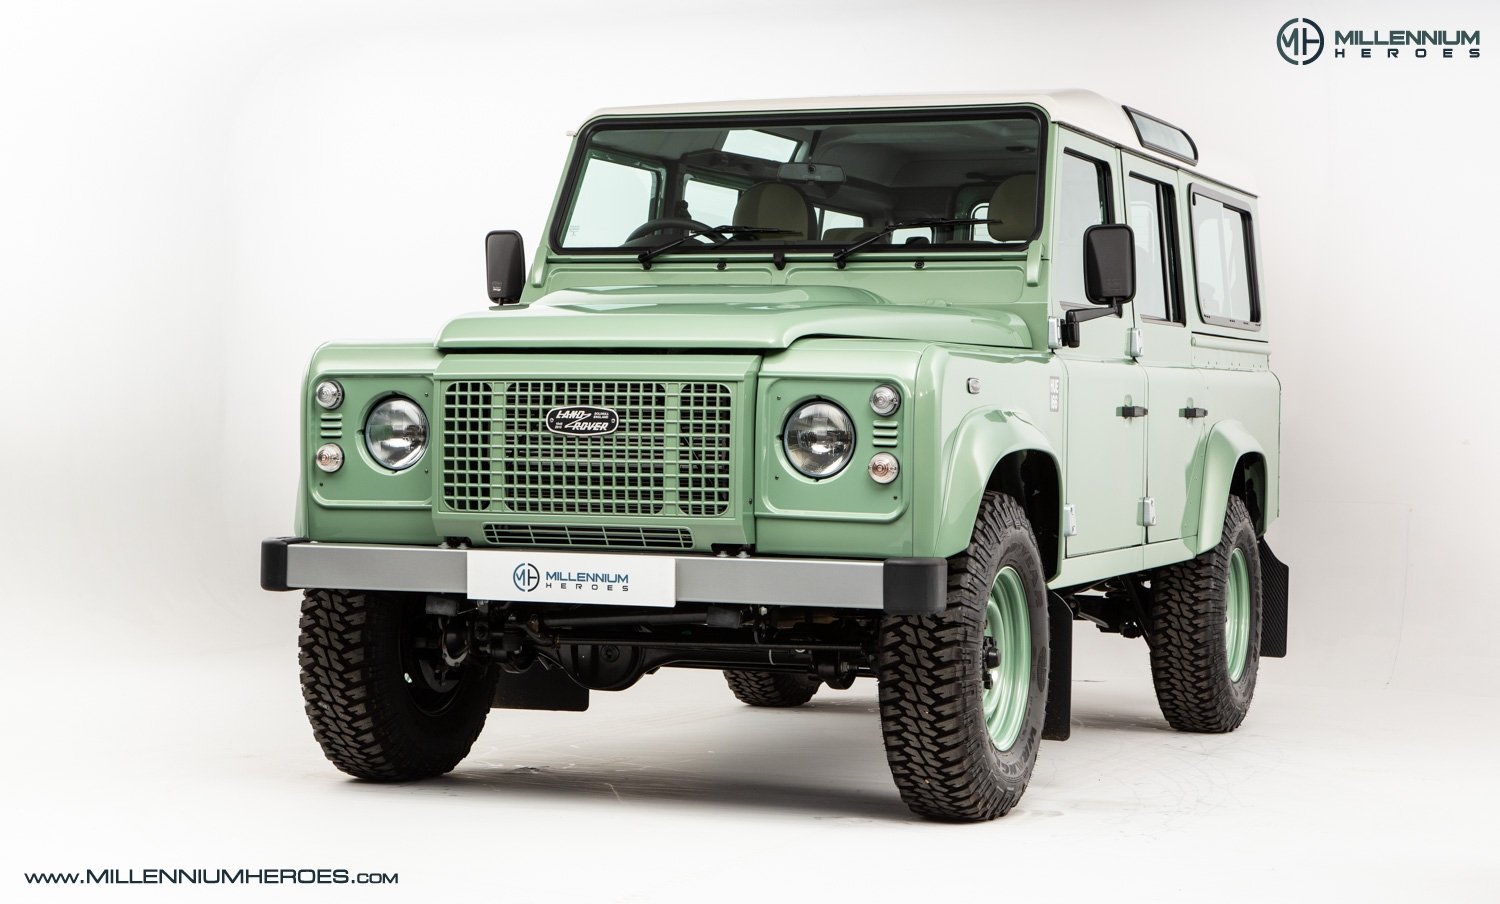 2015 Land Rover Defender - LAND ROVER DEFENDER 110 HERITAGE EDITION // 1 OF // 557 MILES | Classic Driver